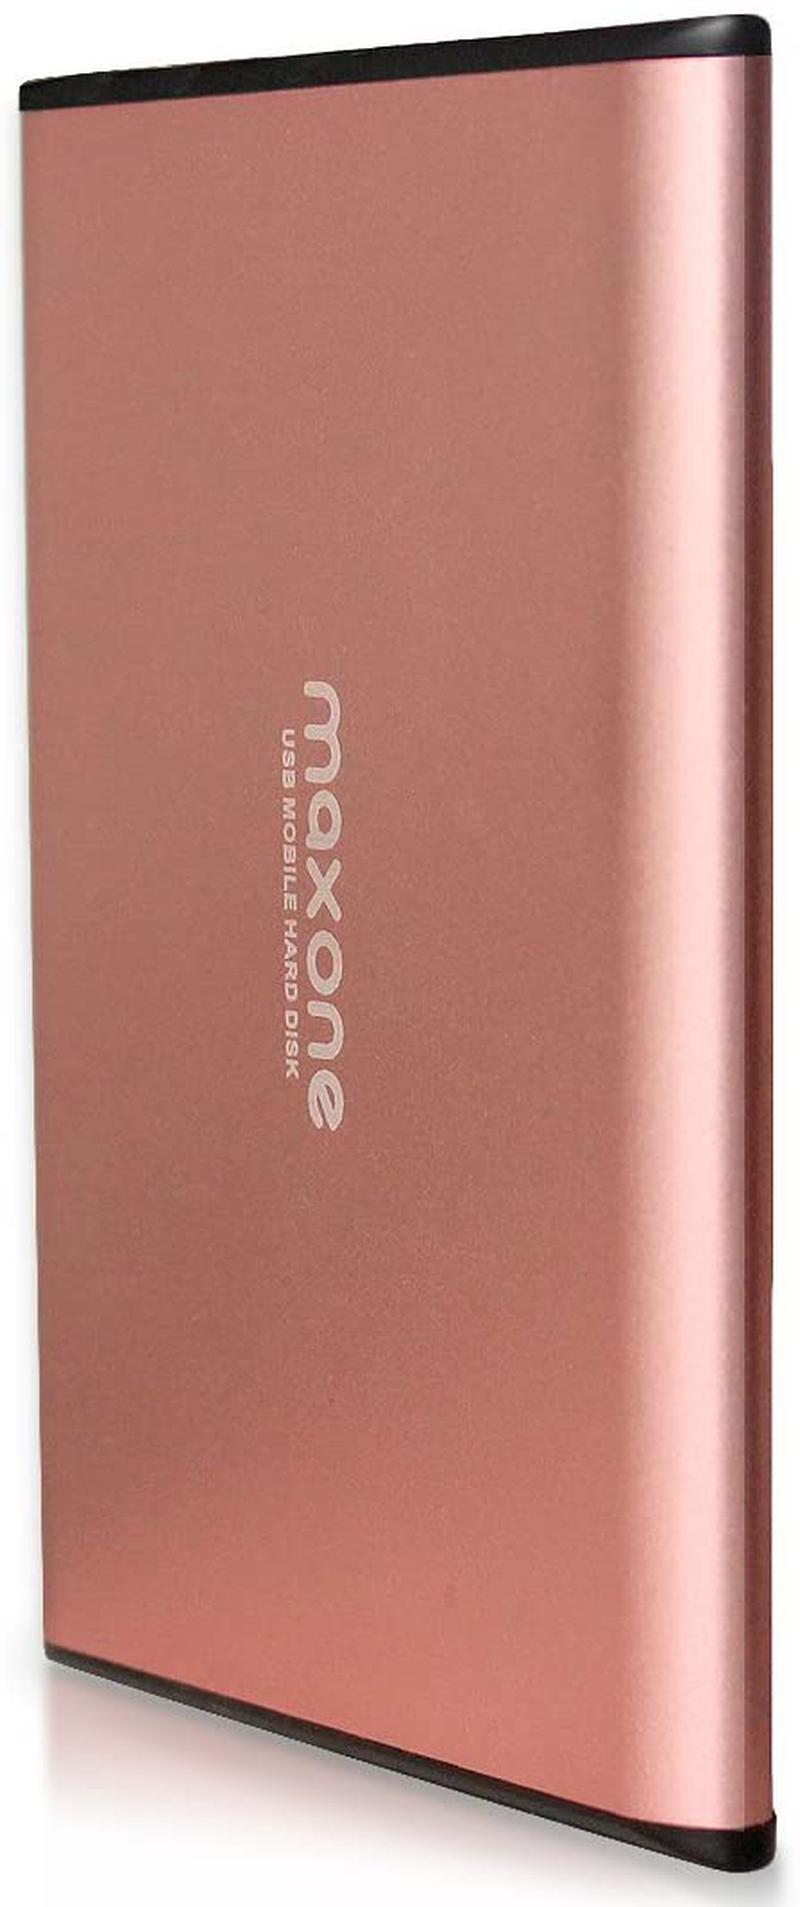 Maxone 500GB Ultra Slim Portable External Hard Drive HDD USB 3.0 for PC, Mac, Laptop, PS4, Xbox one - Charcoal Grey Electronics > Electronics Accessories > Computer Components > Storage Devices > Hard Drives Maxone Rose Pink 500GB 